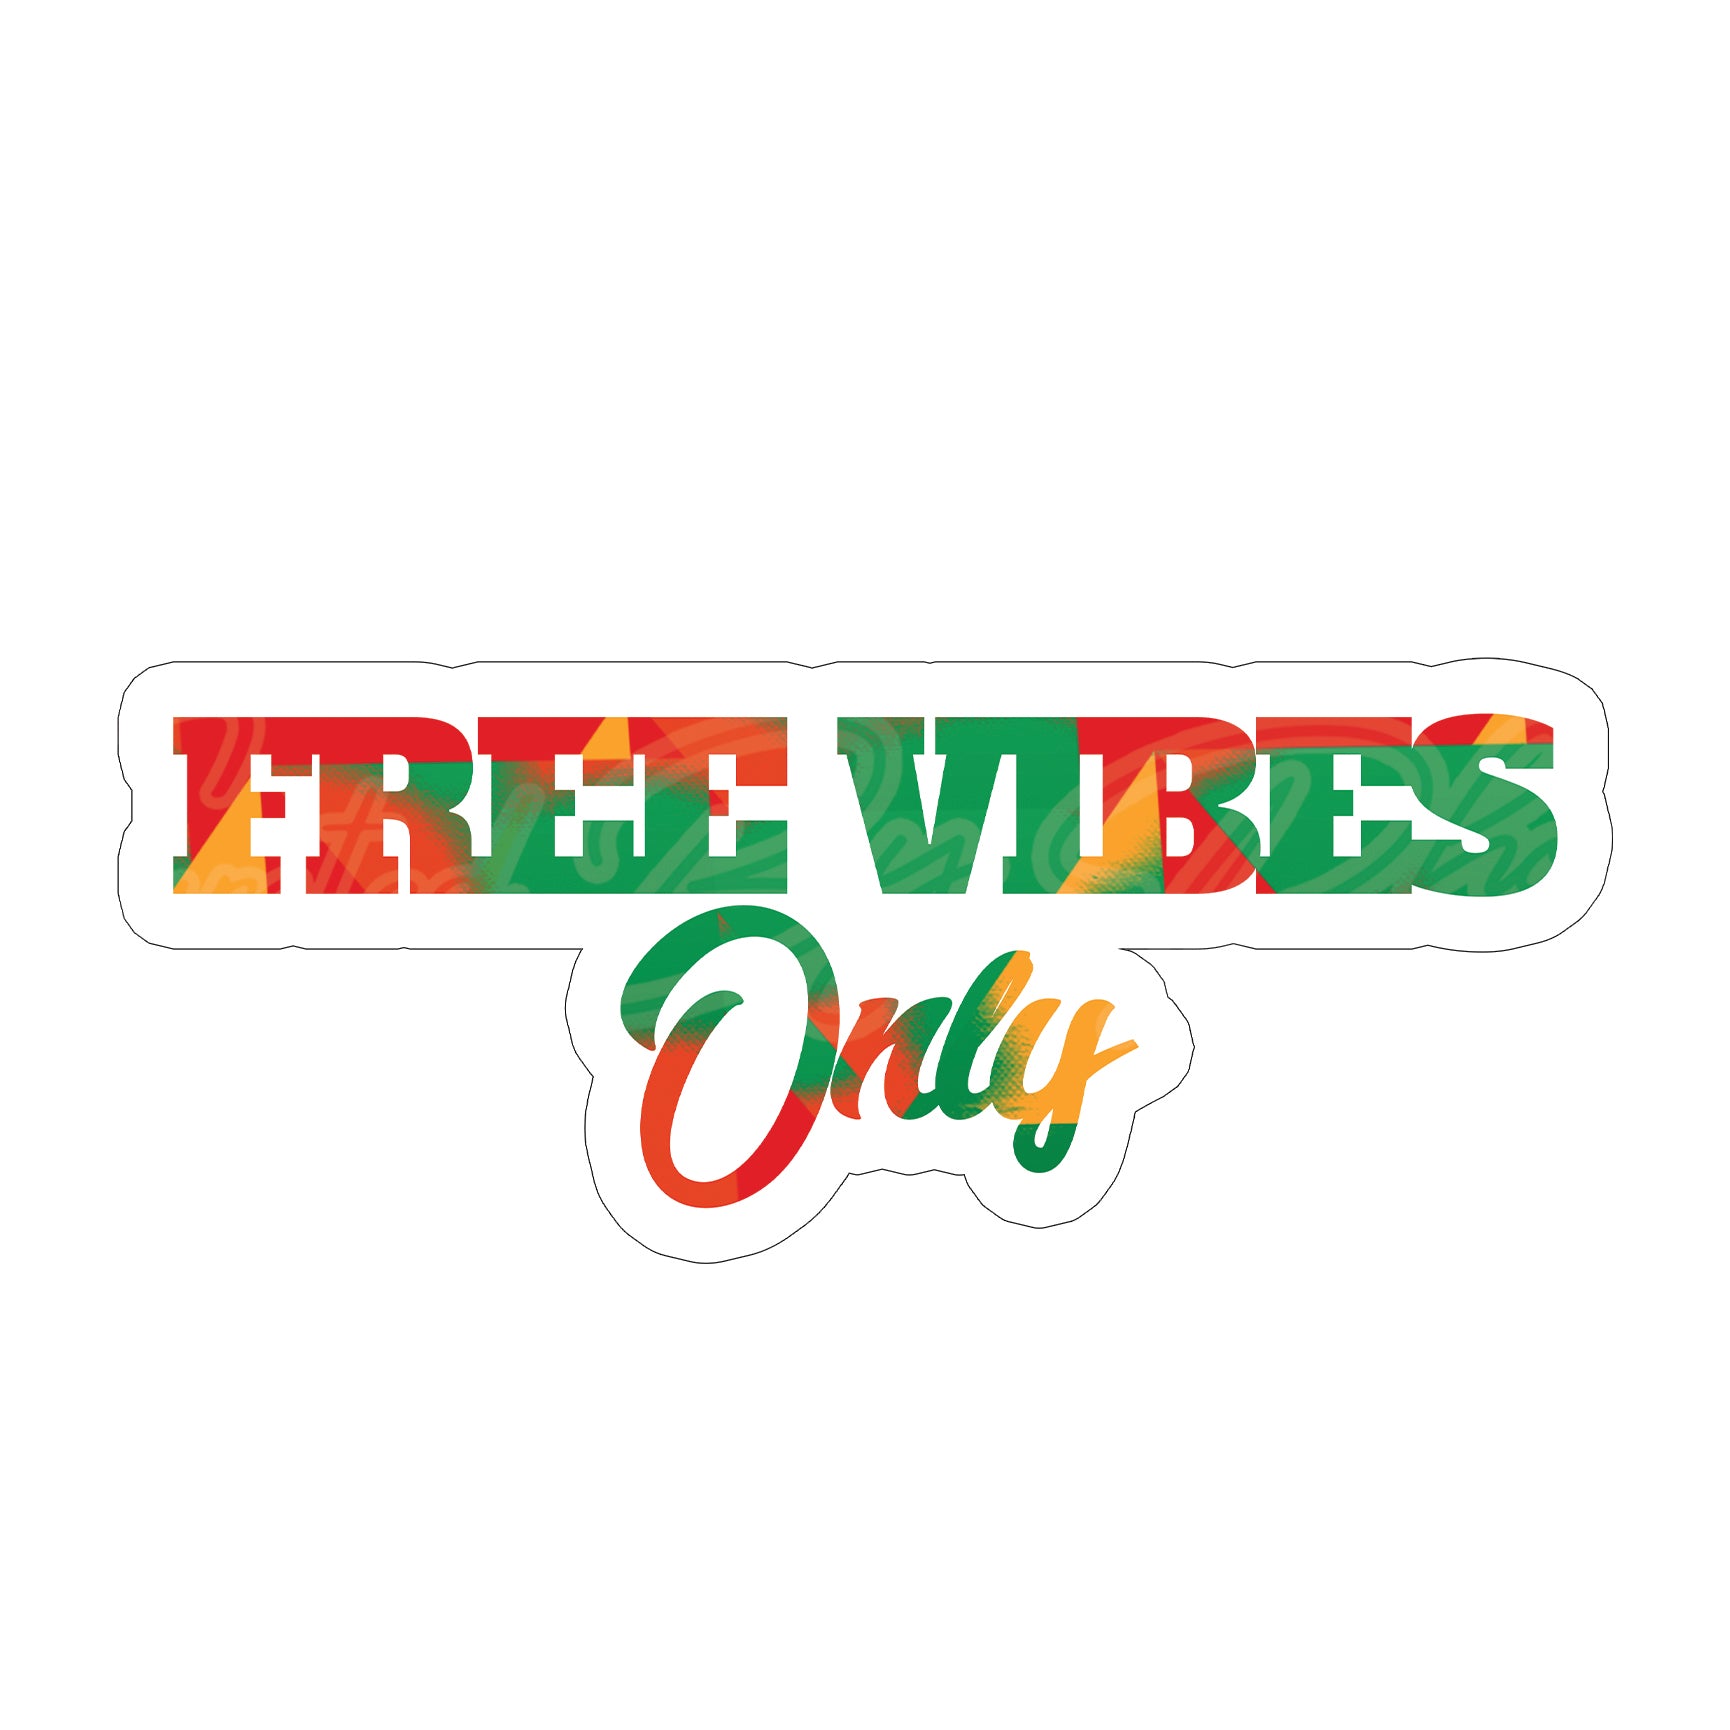 Free Vibes Only prop-juneteenth prop-black history prop-black history photo booth prop custom props- custom prop signs-props -Curated by Phoenix 